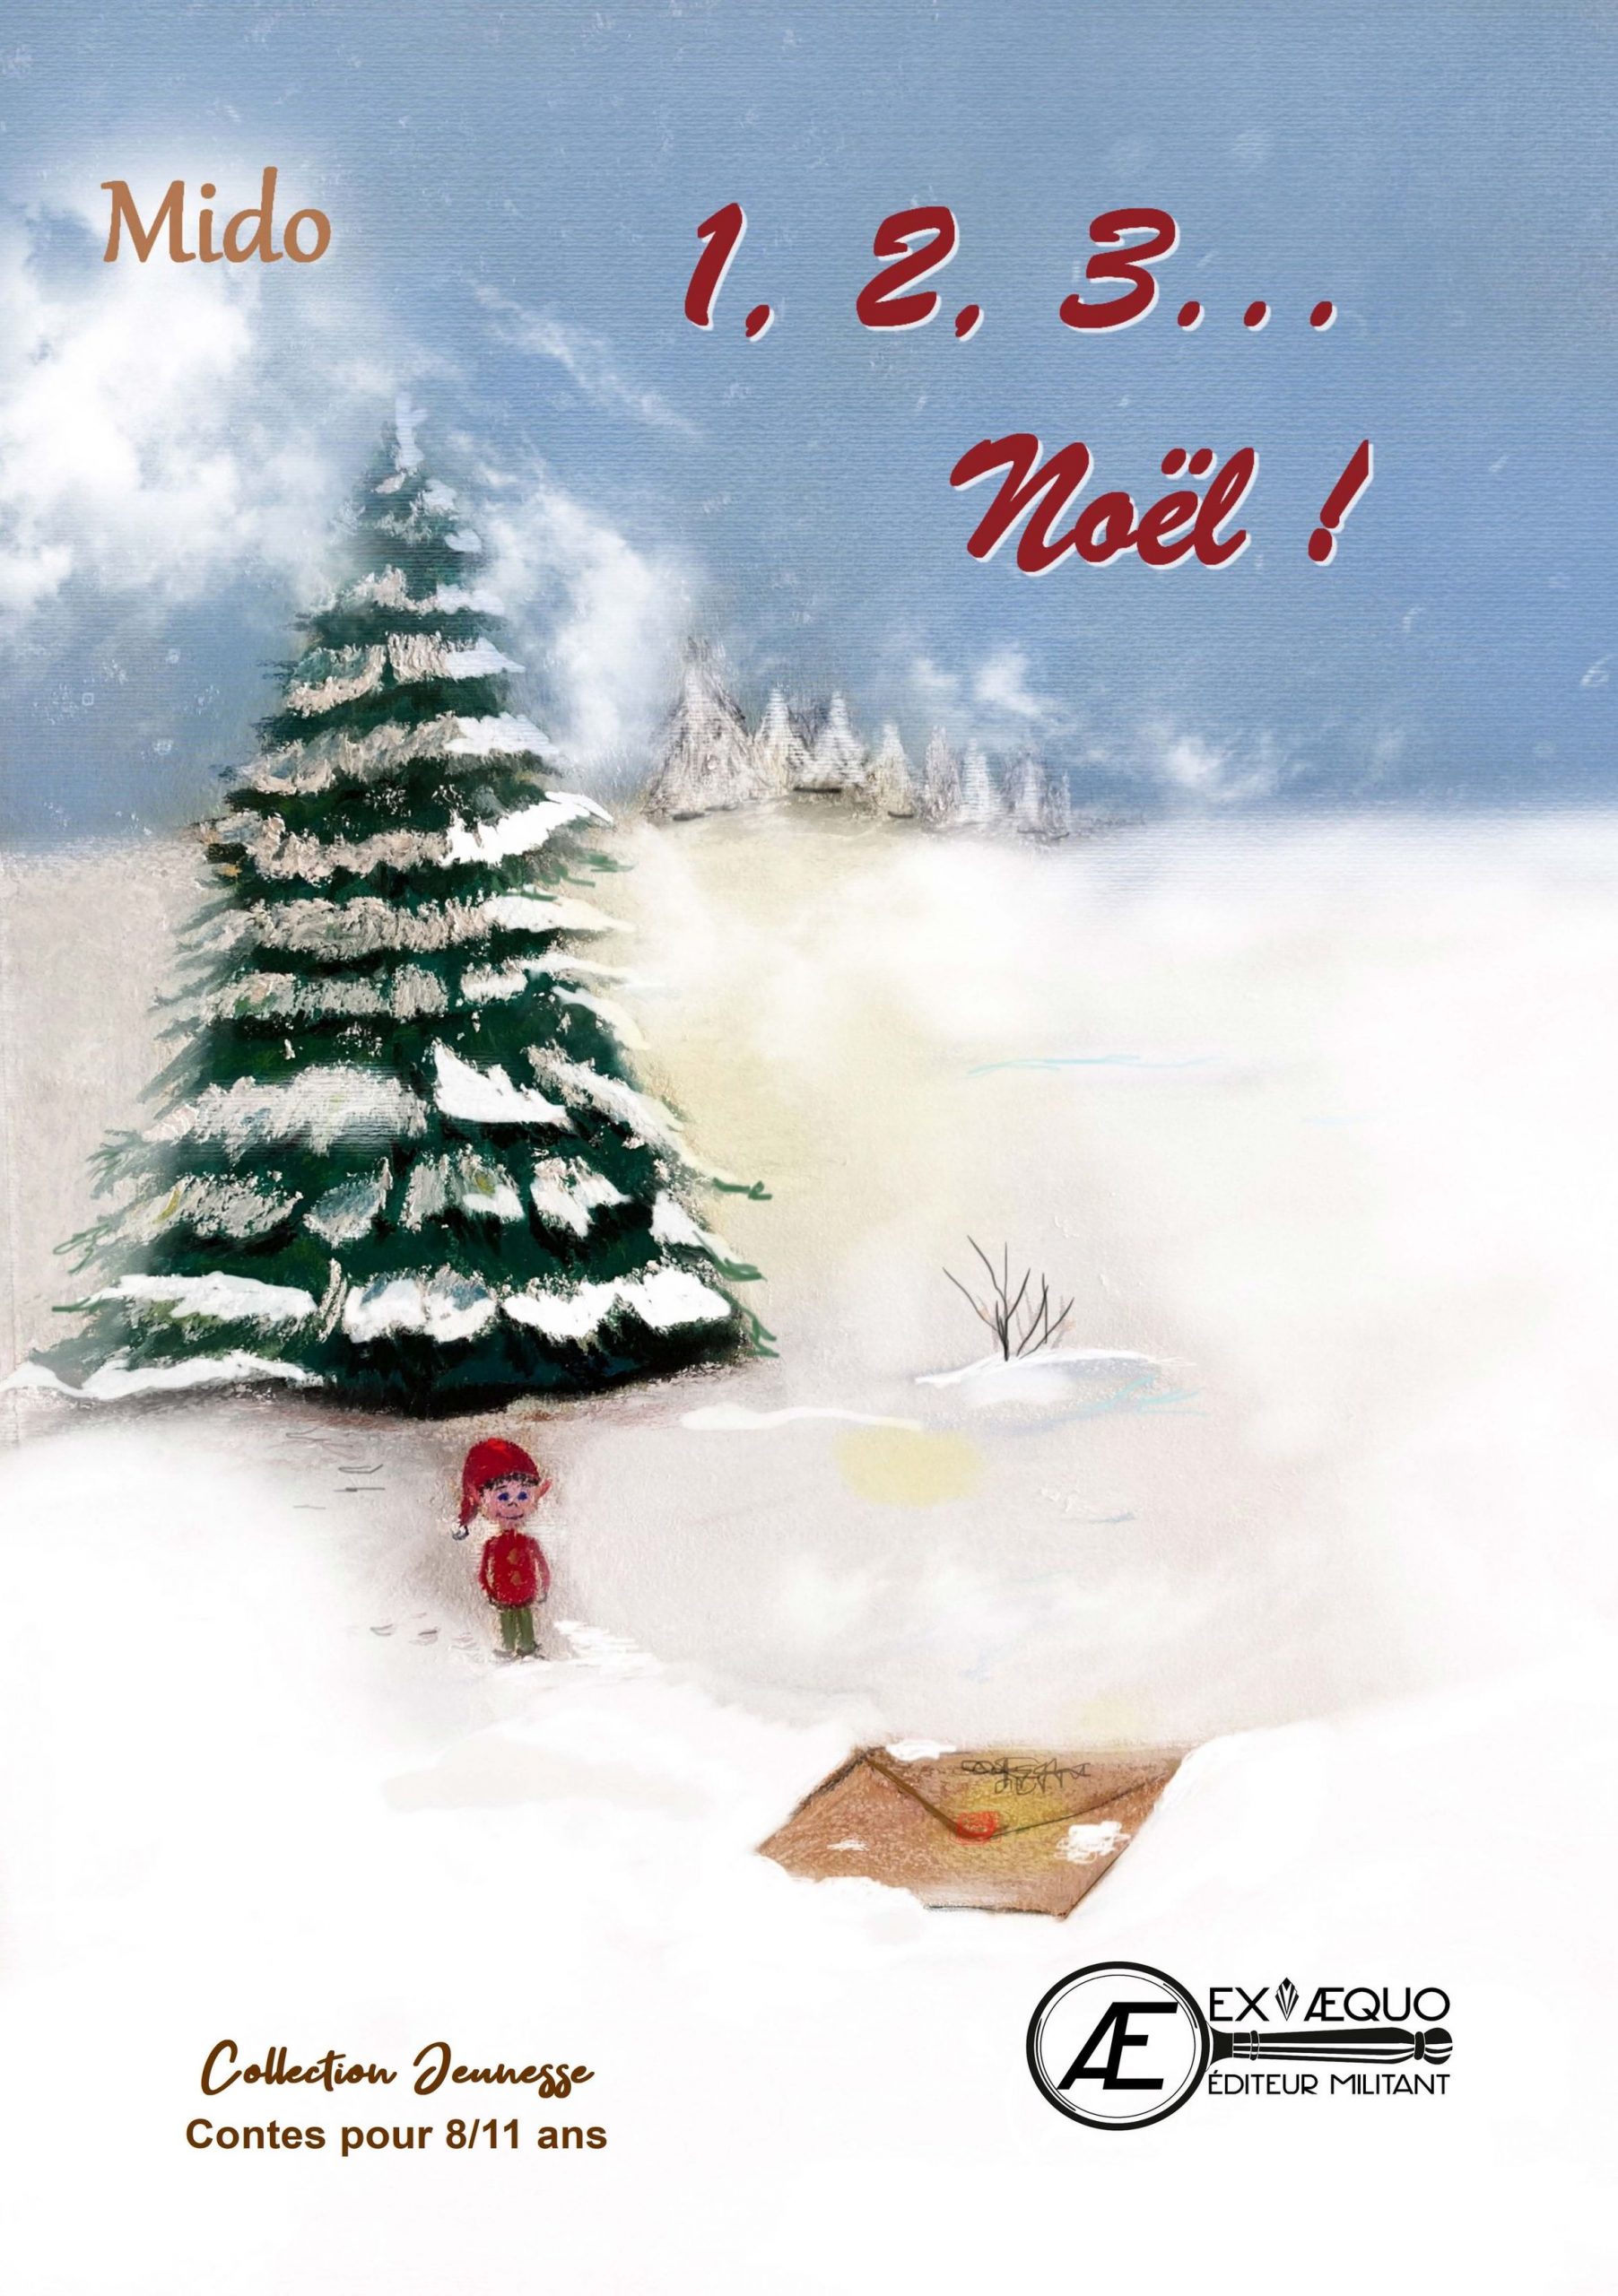 You are currently viewing 1, 2, 3… Noel !, de Mido